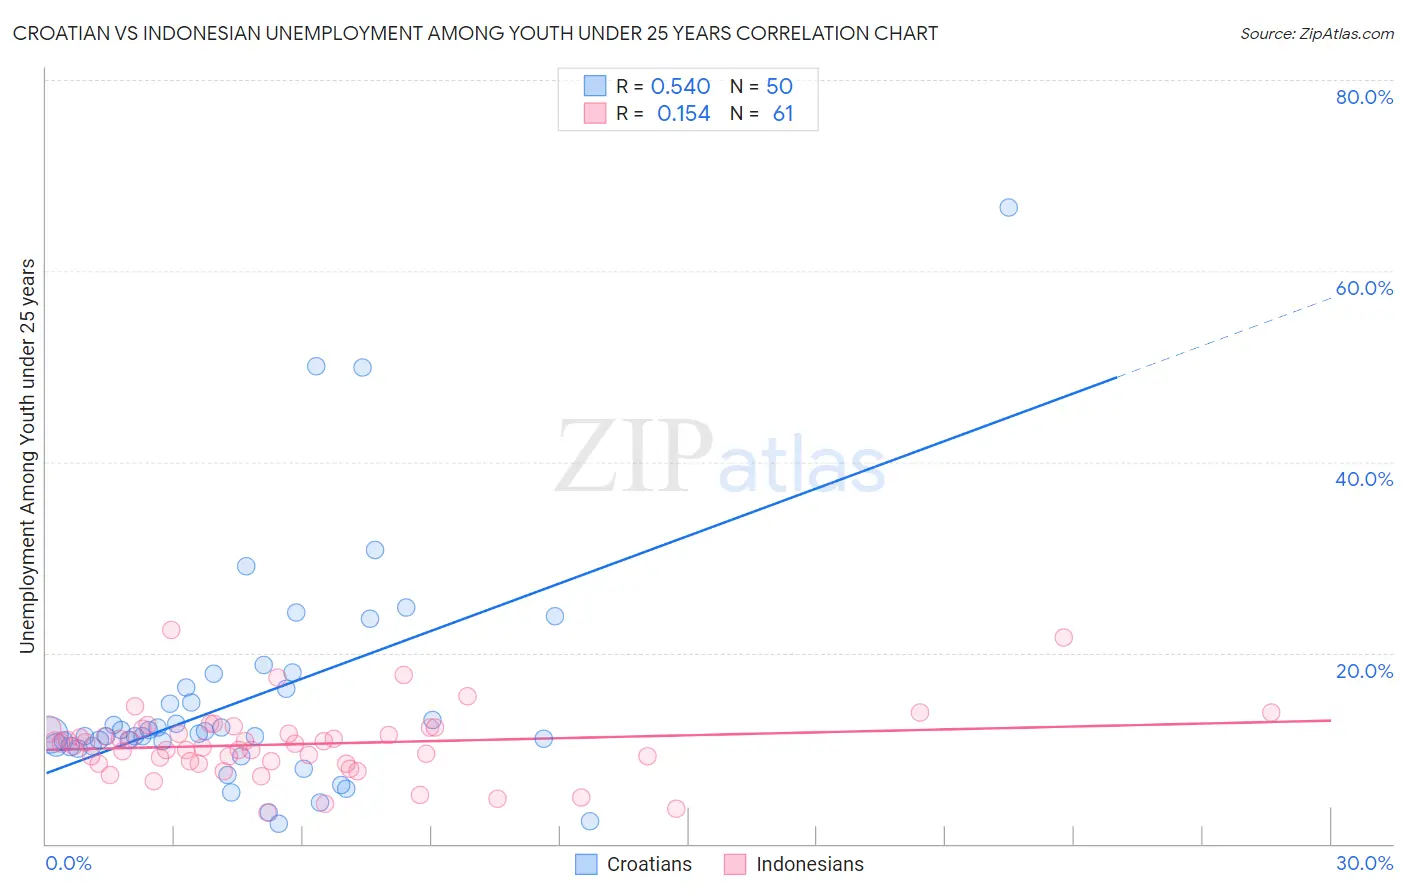 Croatian vs Indonesian Unemployment Among Youth under 25 years